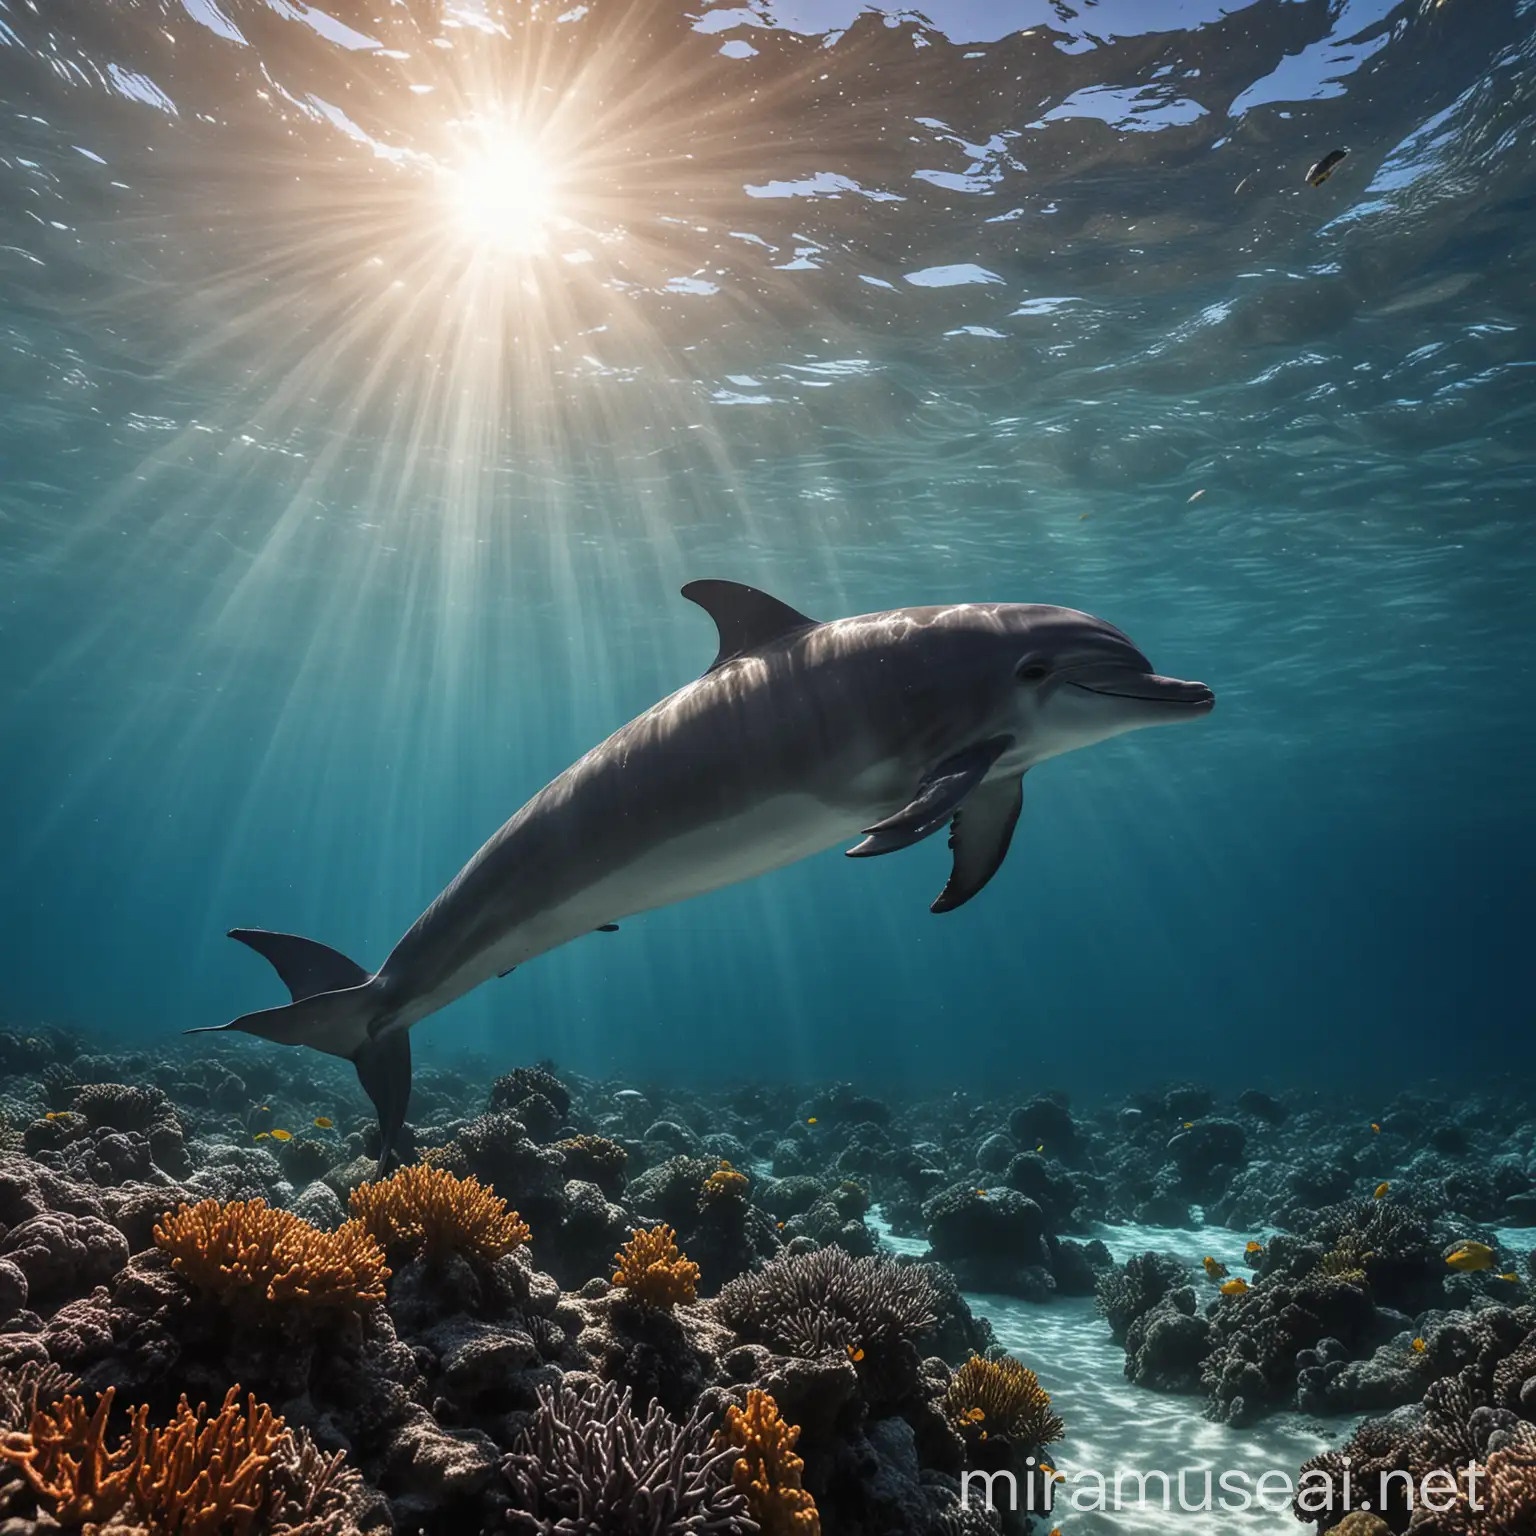 Graceful Dolphin Swimming in Clear Blue Ocean with Coral Reefs and Sunlight